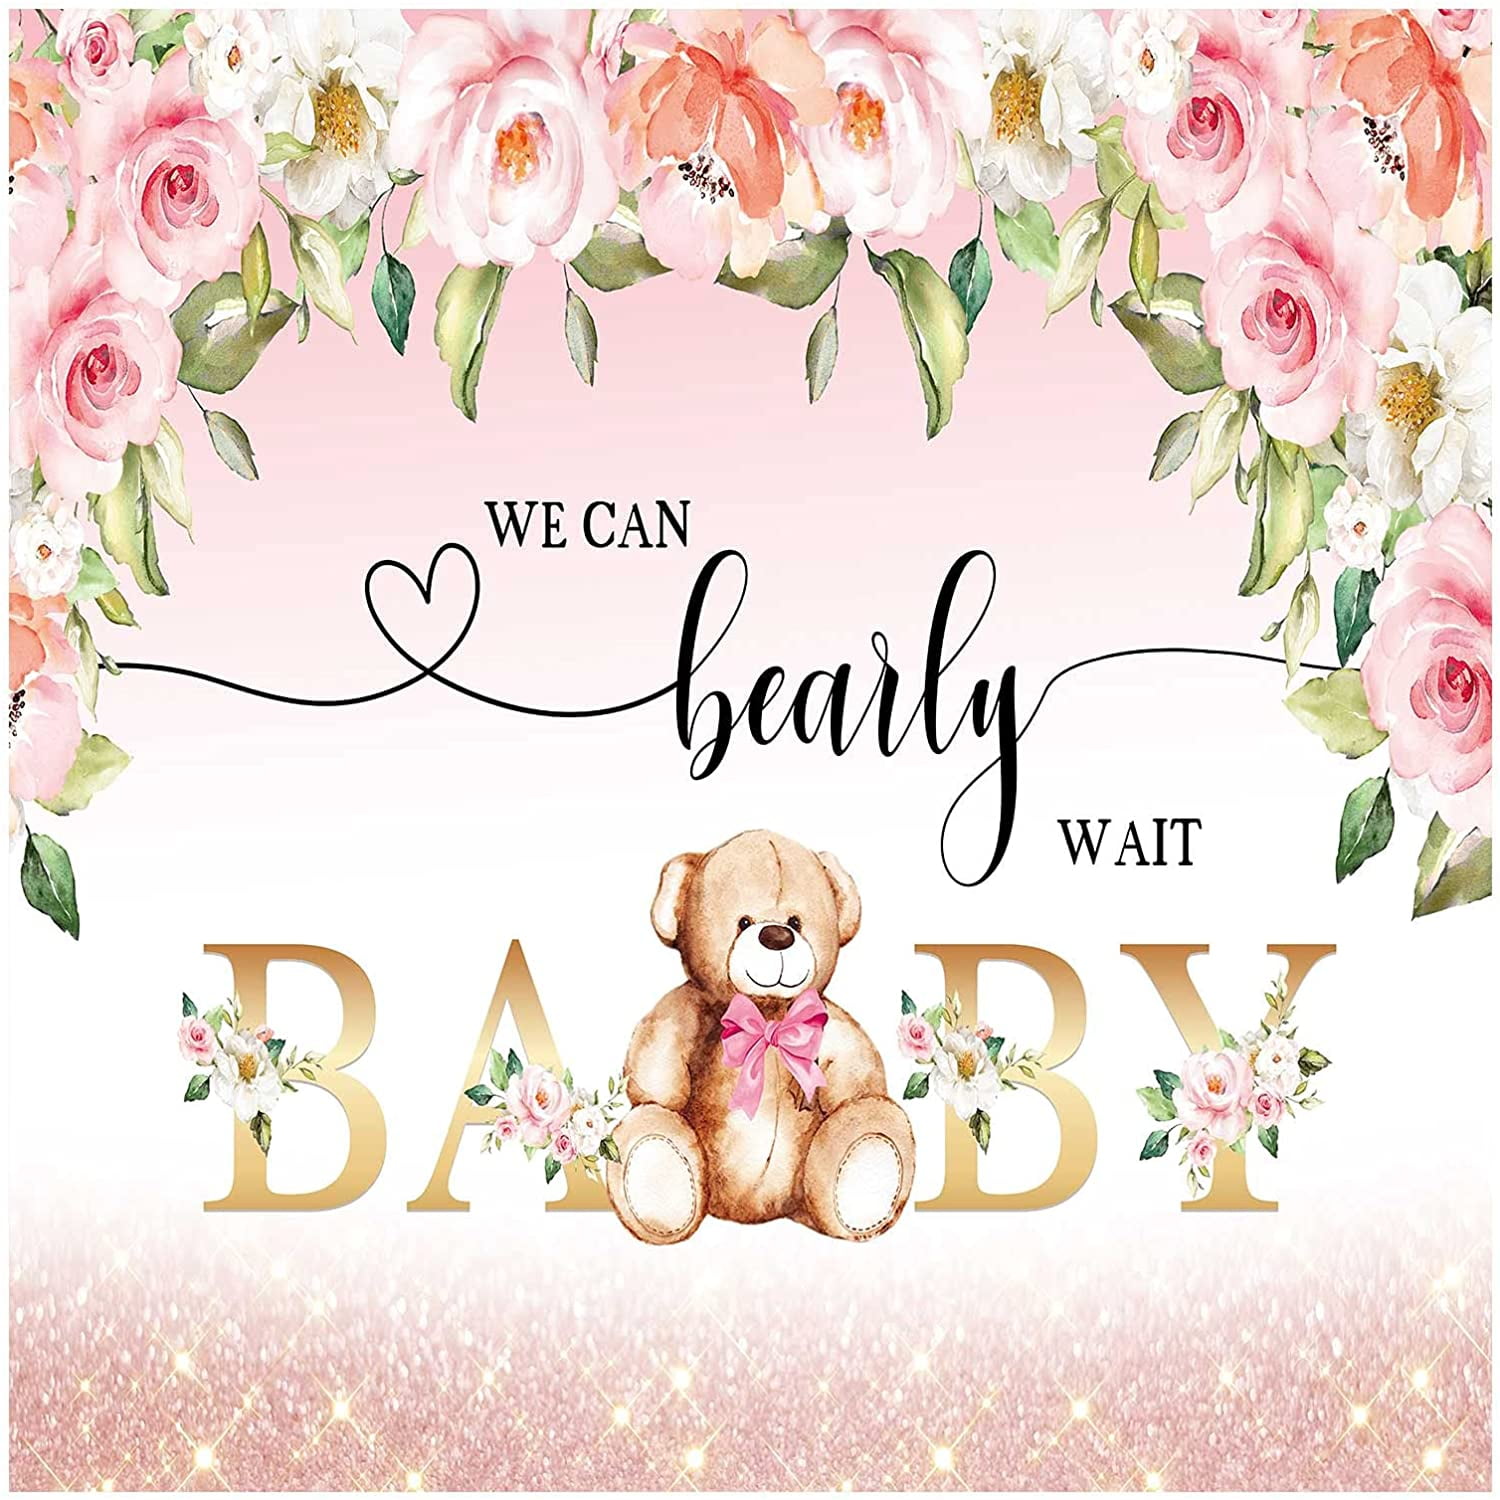 Photo Backgrounds Baby Pink Baby Photography Background Green Leaves Board Decor for Photophone Birthday Photo Studio-8x6ft